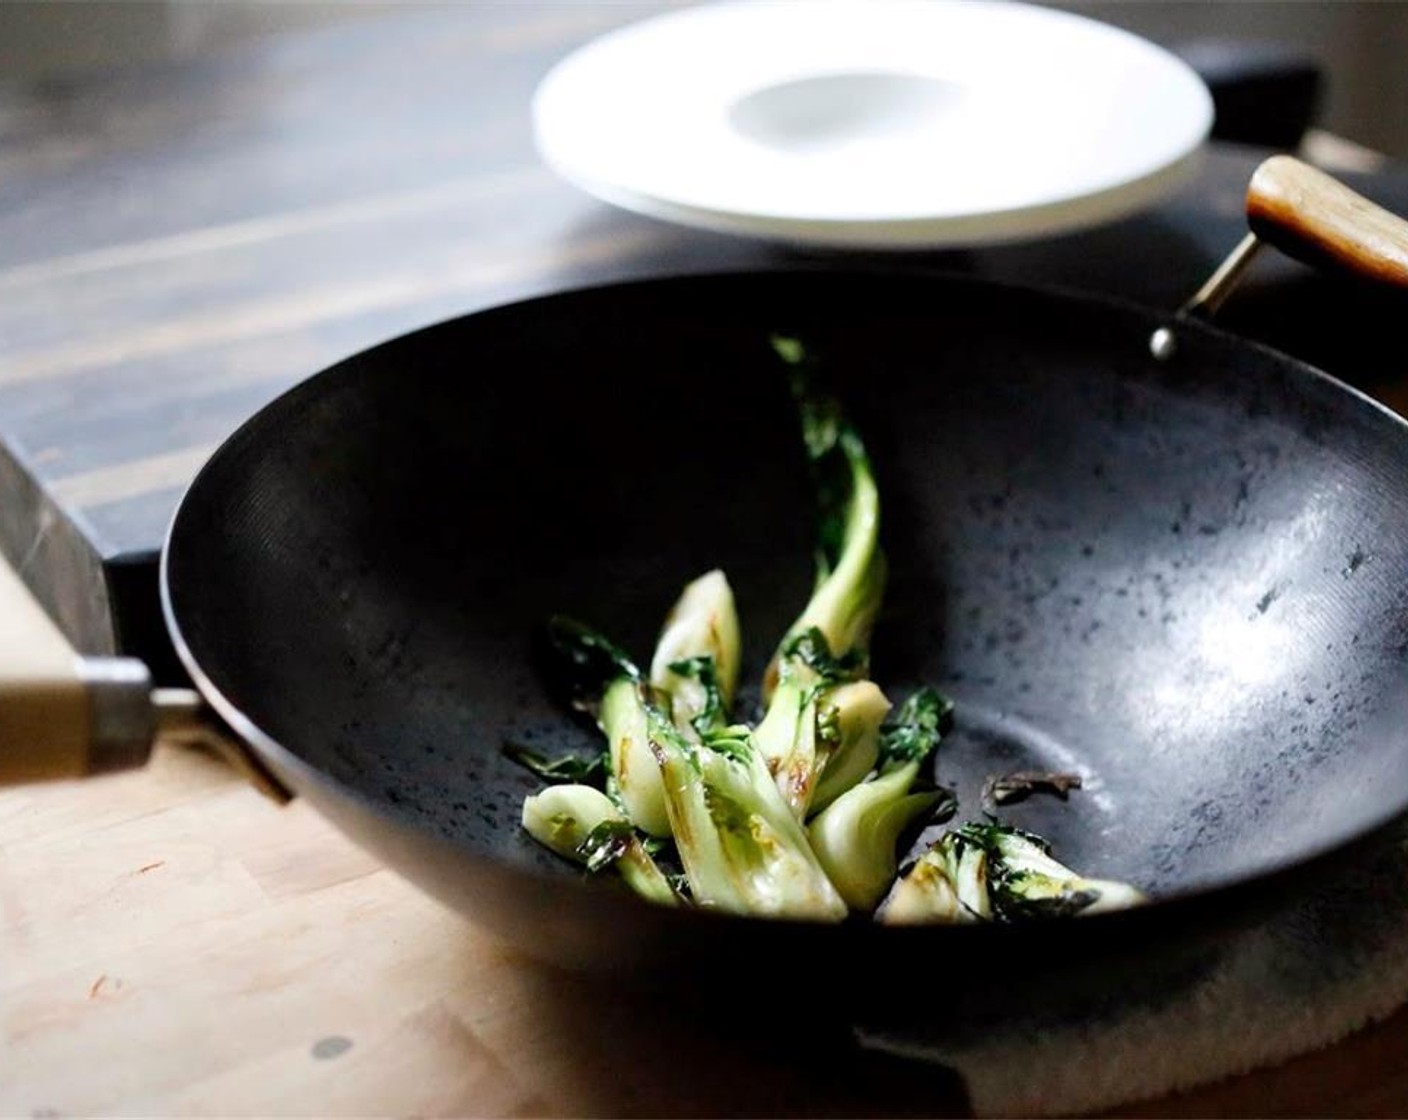 step 16 Heat oil in a wok or skillet over medium high heat. When hot, add baby bok choy, turning occasionally, until wilted, about 4 minutes.  Add a couple tablespoons of the fish marinade, tossing to coat, letting the marinade cook and reduce.